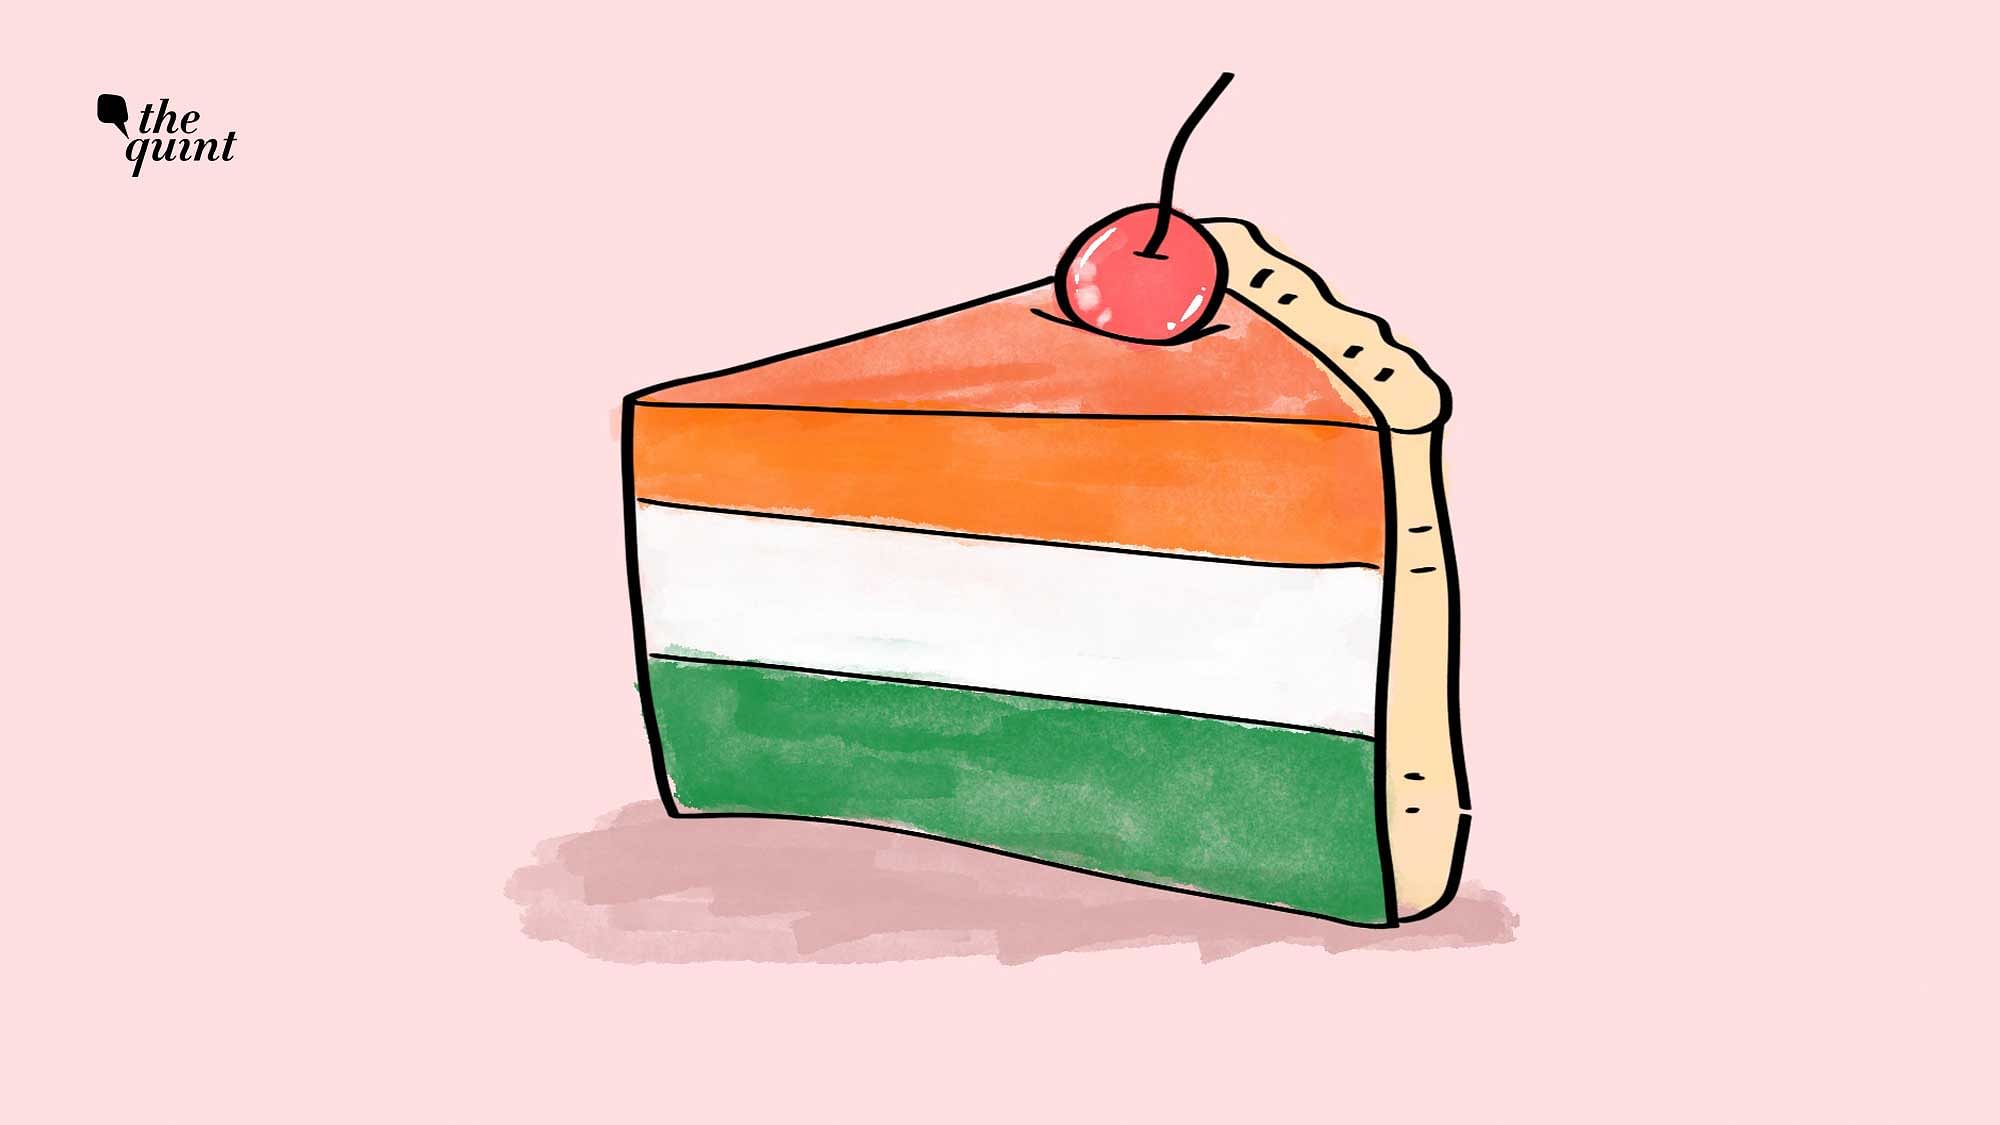 Madras High Court refuses to allow prosecution for cutting of an Indian flag-themed cake.